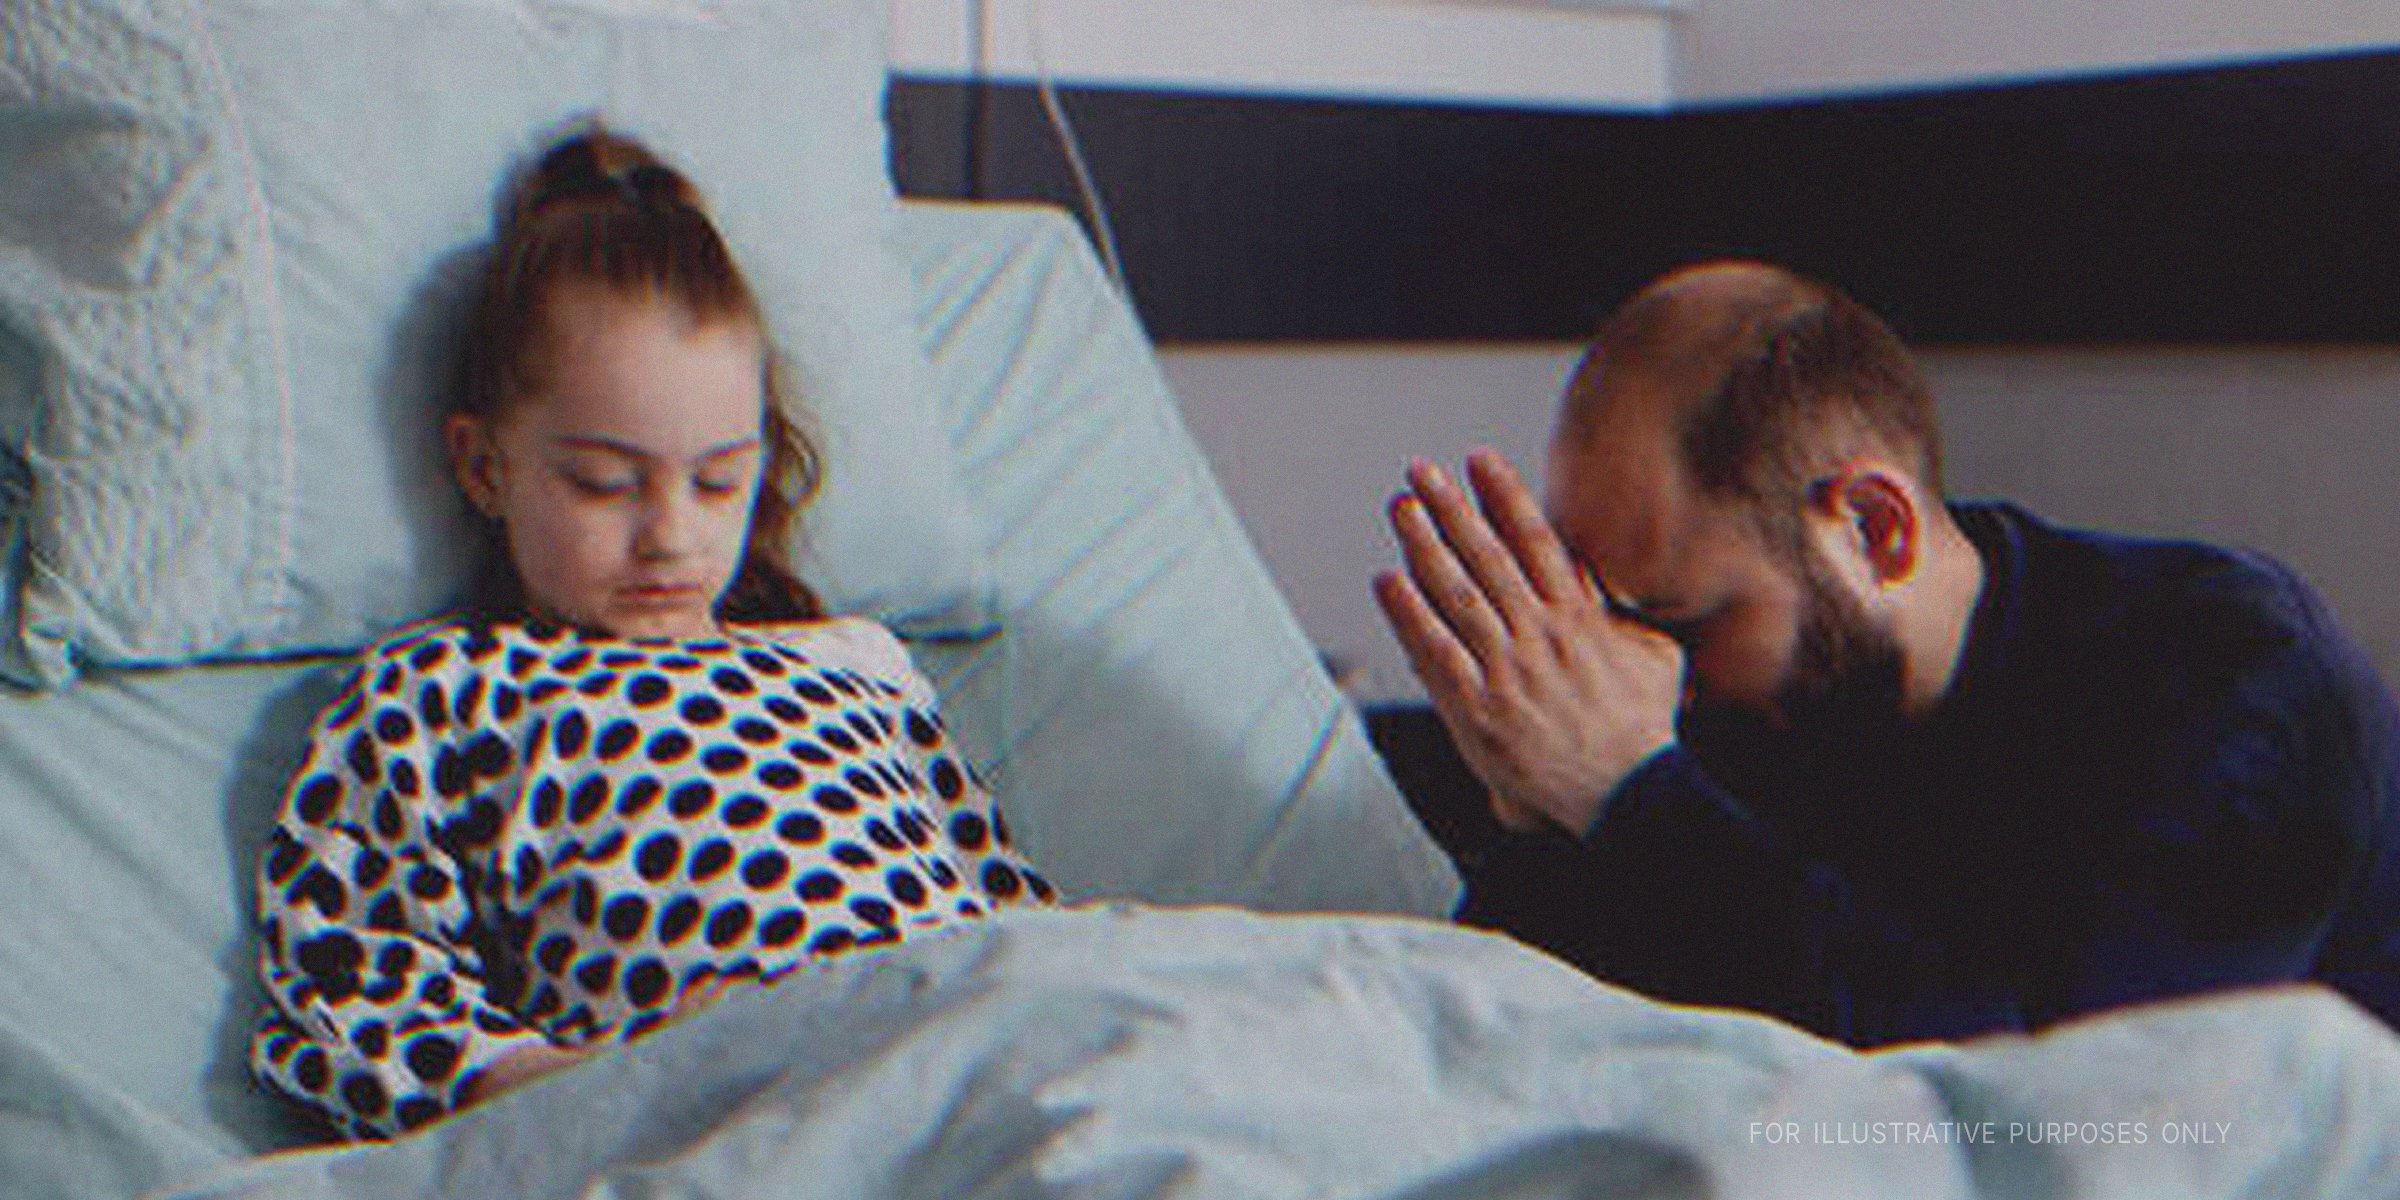 A young girl in hospital bed and a grown man praying beside her. | Source: Getty Images